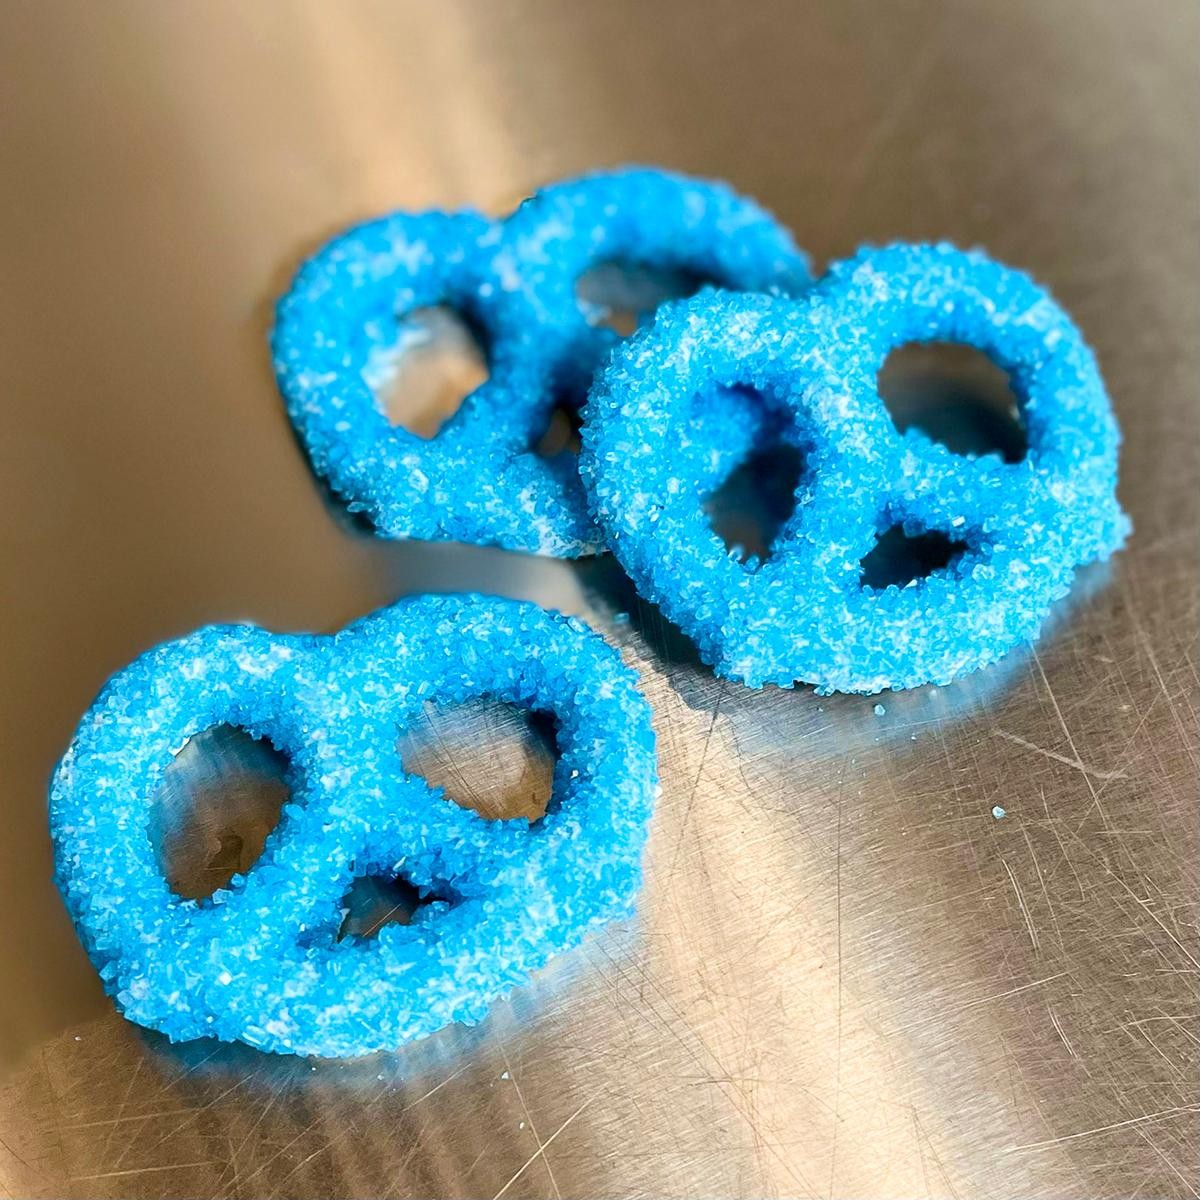 Blue Crystals White Chocolate Covered Pretzels - 8ct Box